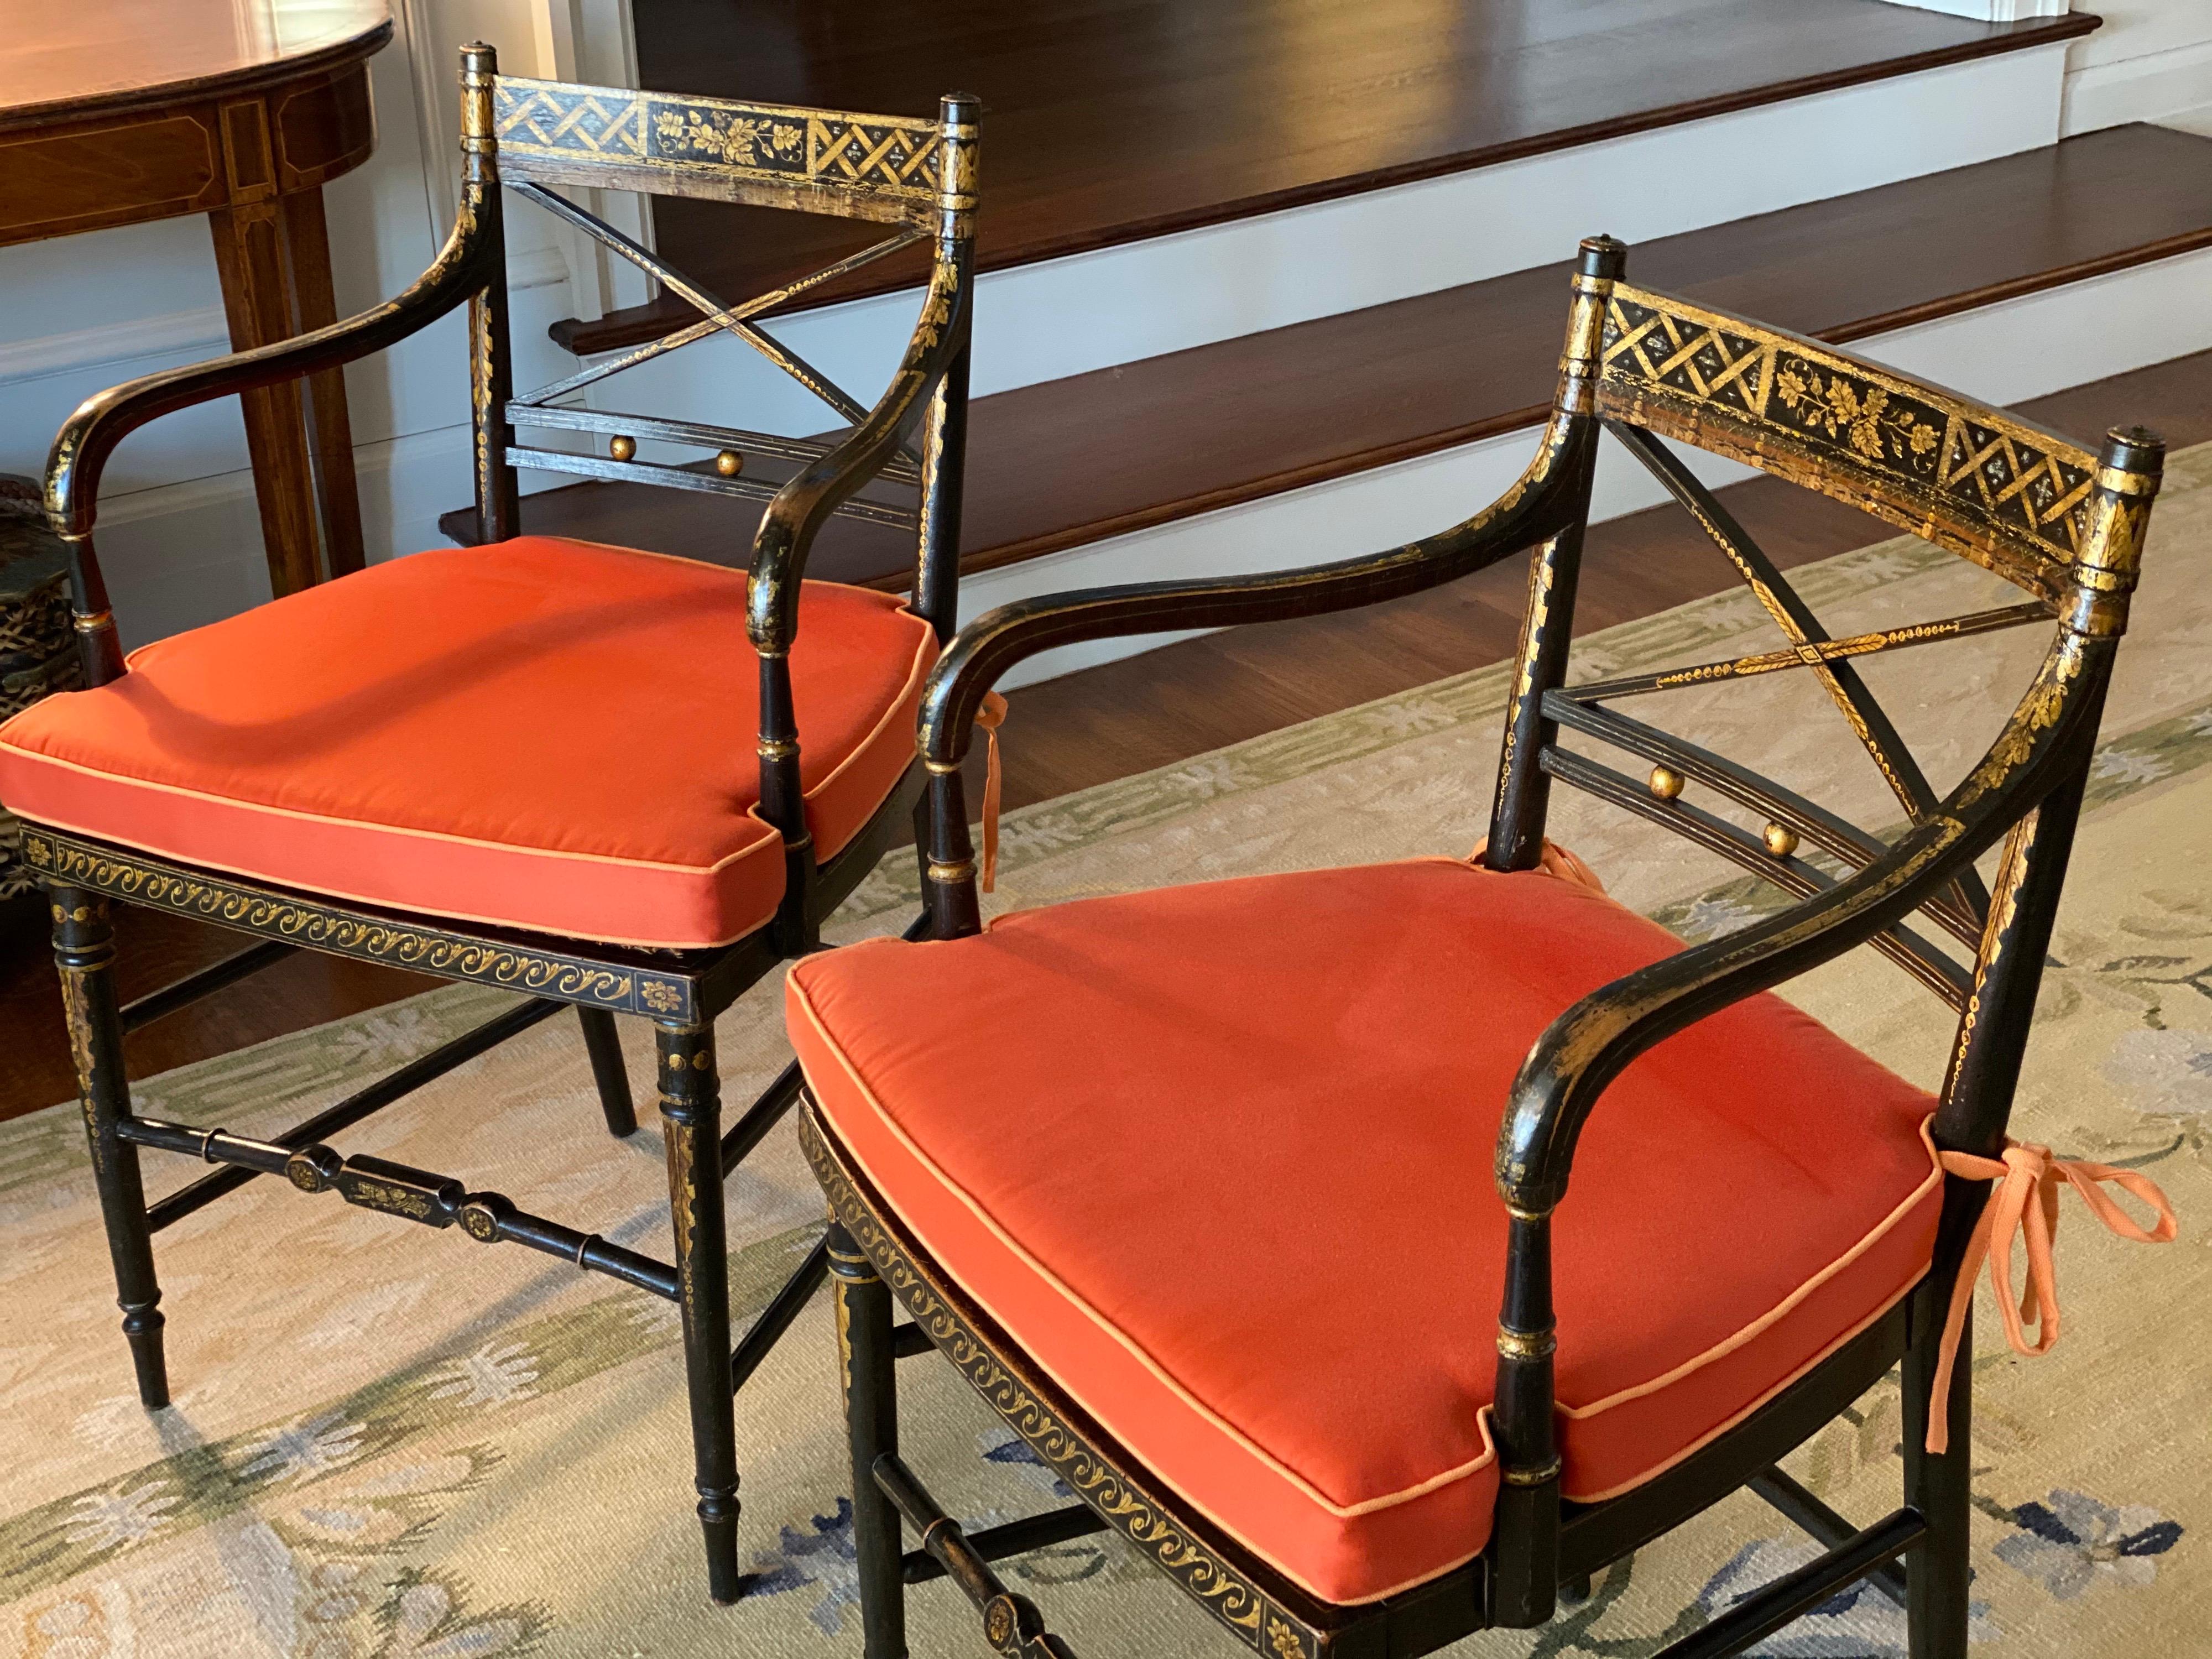 Fine pair of Regency parcel-gilt rosewood-grained caned armchairs, circa 1810
Original paint and gilt decoration. Hand caning in good condition. Custom cushions in orange fabric in very good condition.
England, circa 1810
Frame dimensions: 20.25